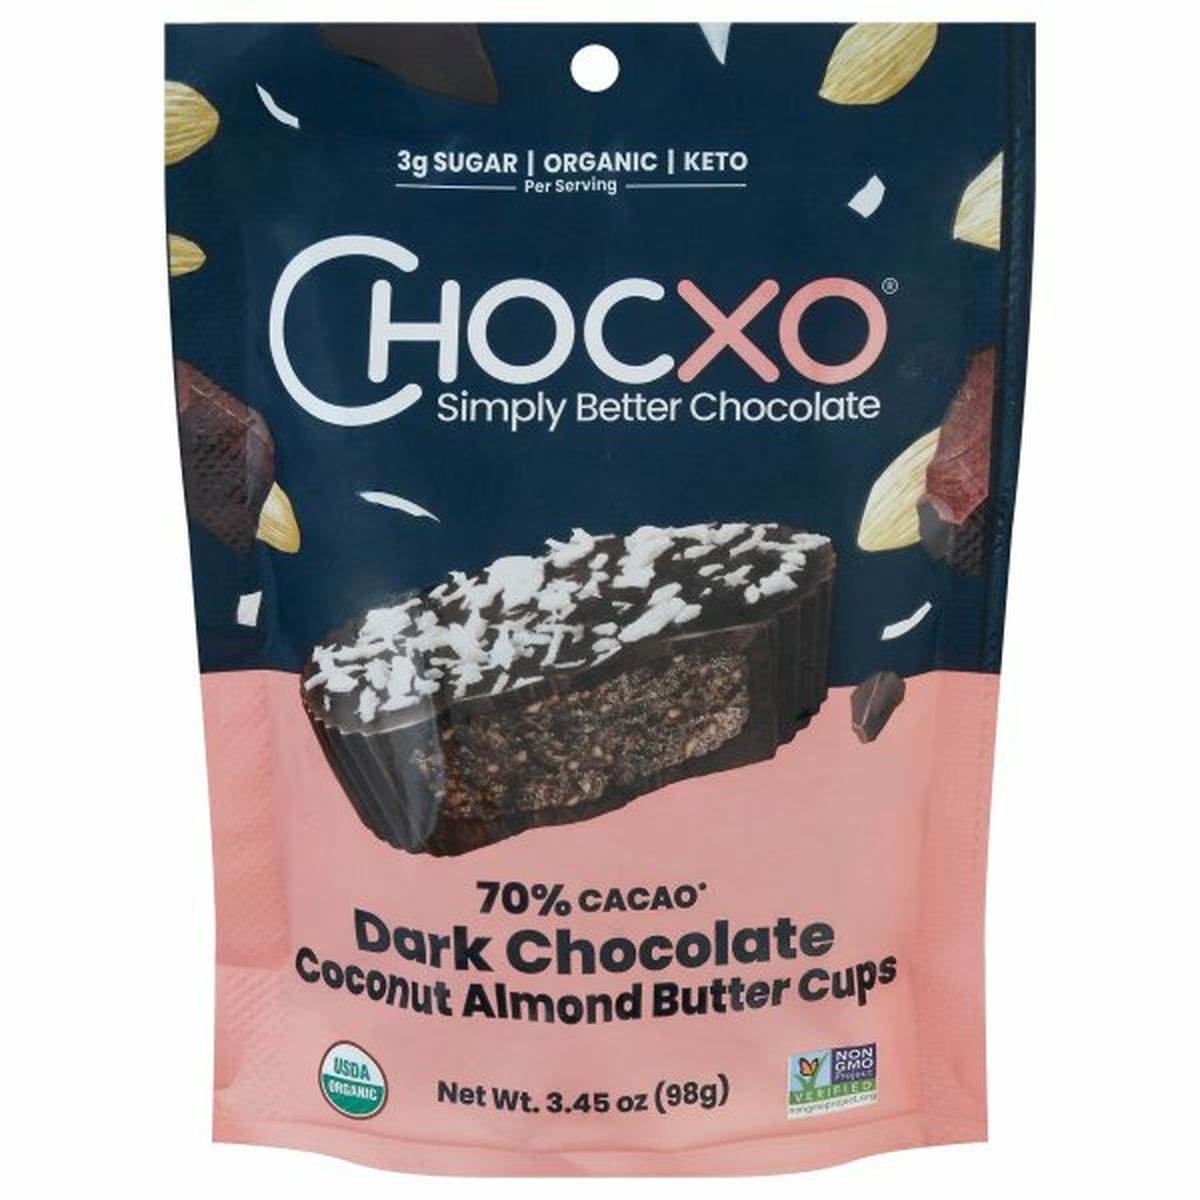 Calories in ChocXo Dark Chocolate, Coconut Almond Butter Cups, 70% Cacao